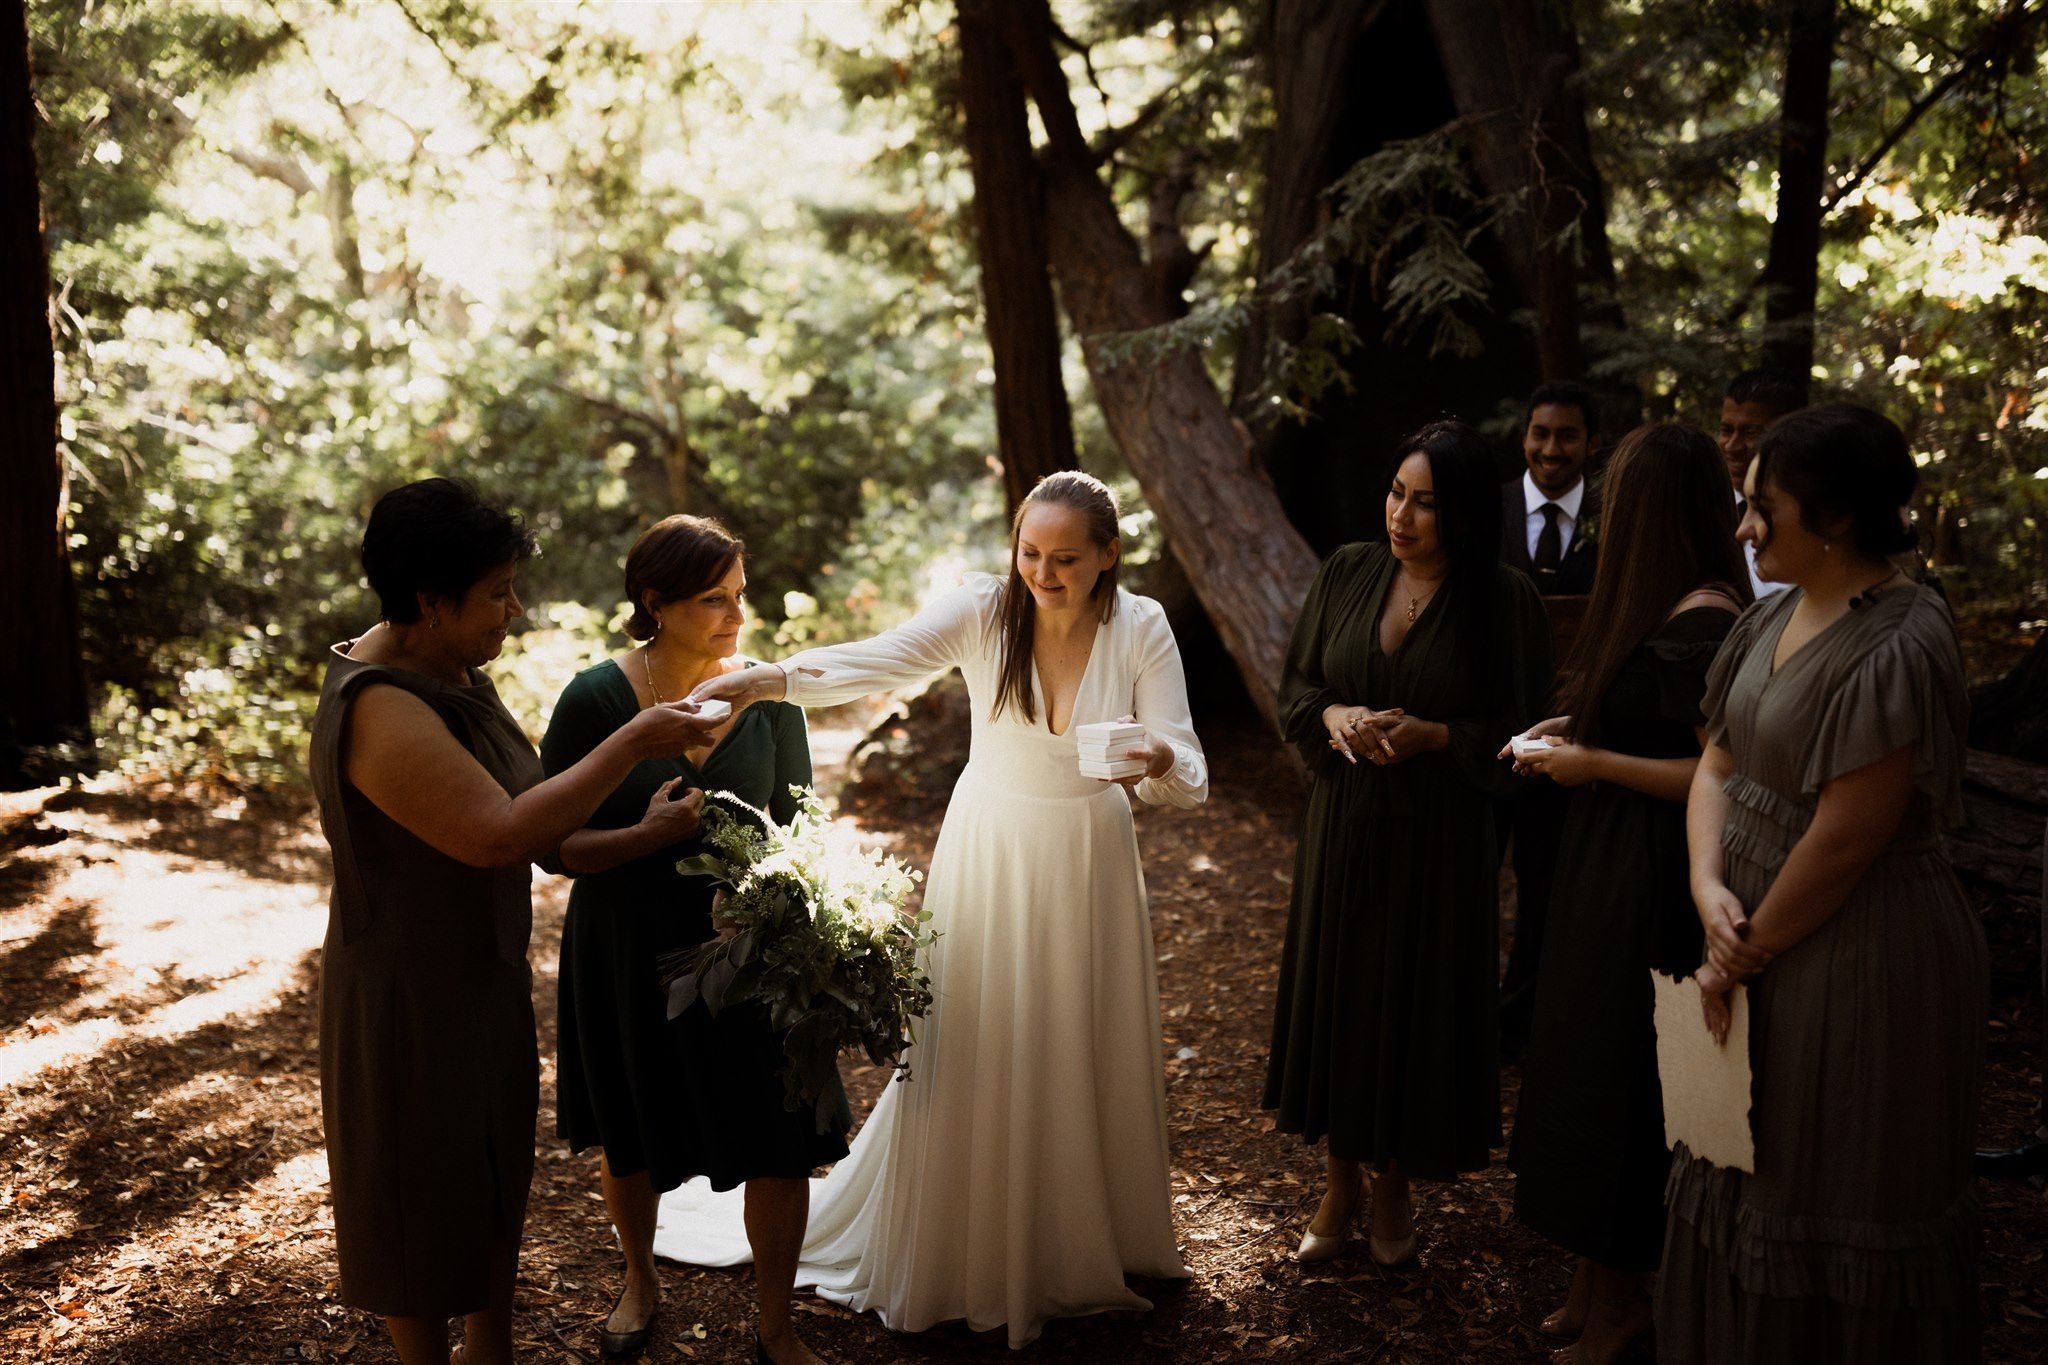 050_Two-Day Big Sur Redwoods Elopement with Family_Will Khoury Elopement Photographer.jpg